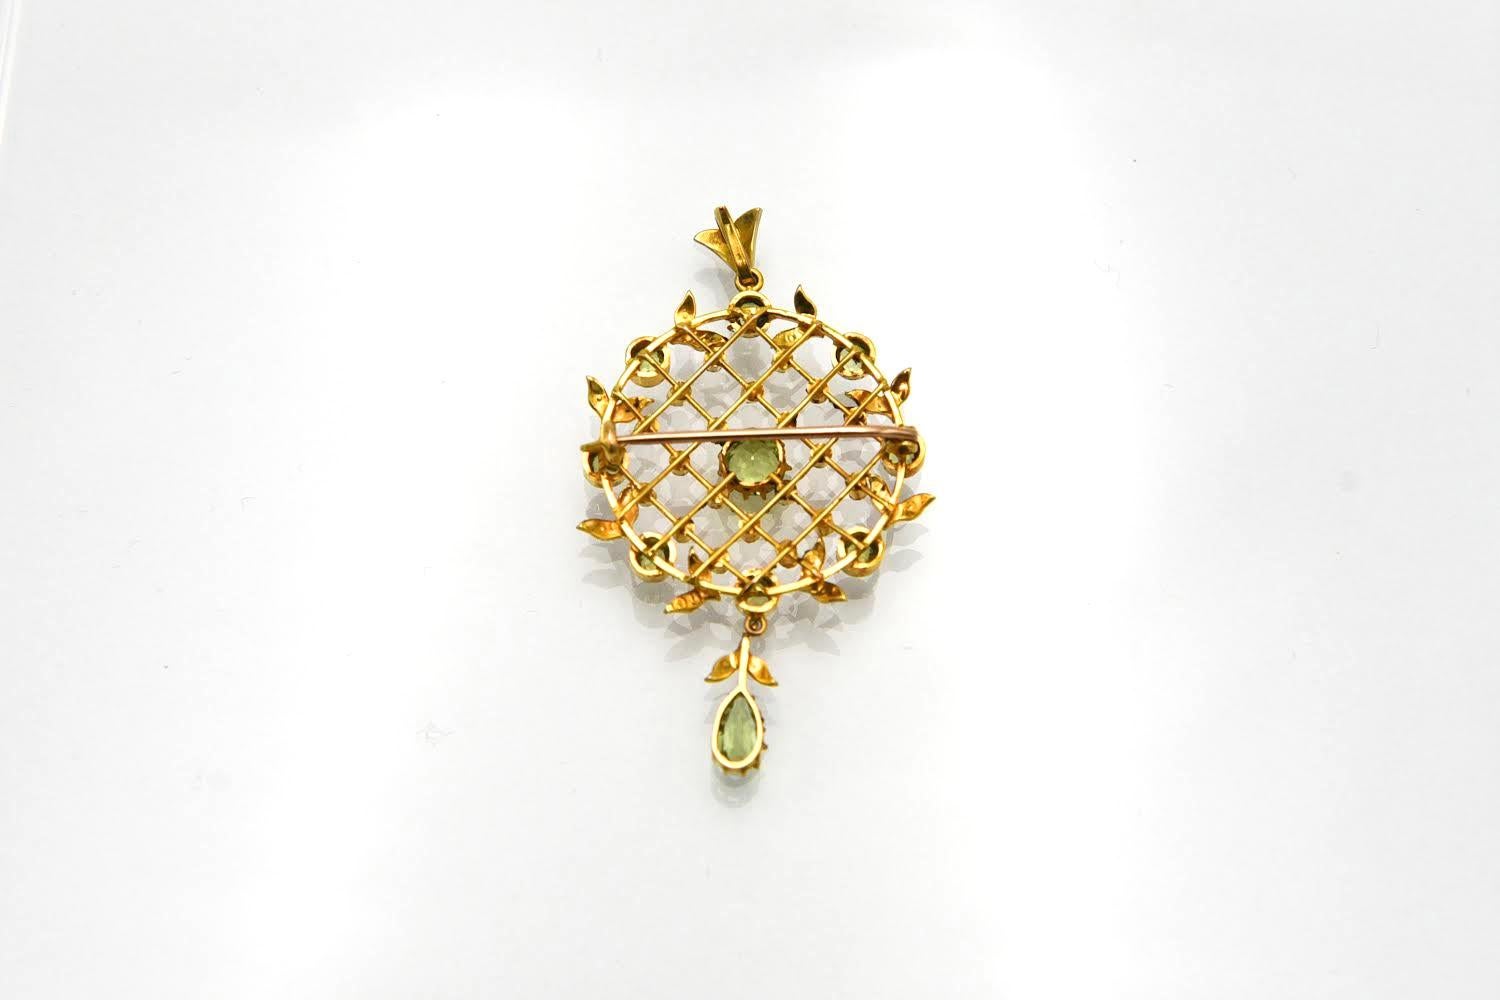 Antique gold pendant/brooch with peridots and pearls, Great Britain, early XXcen 3